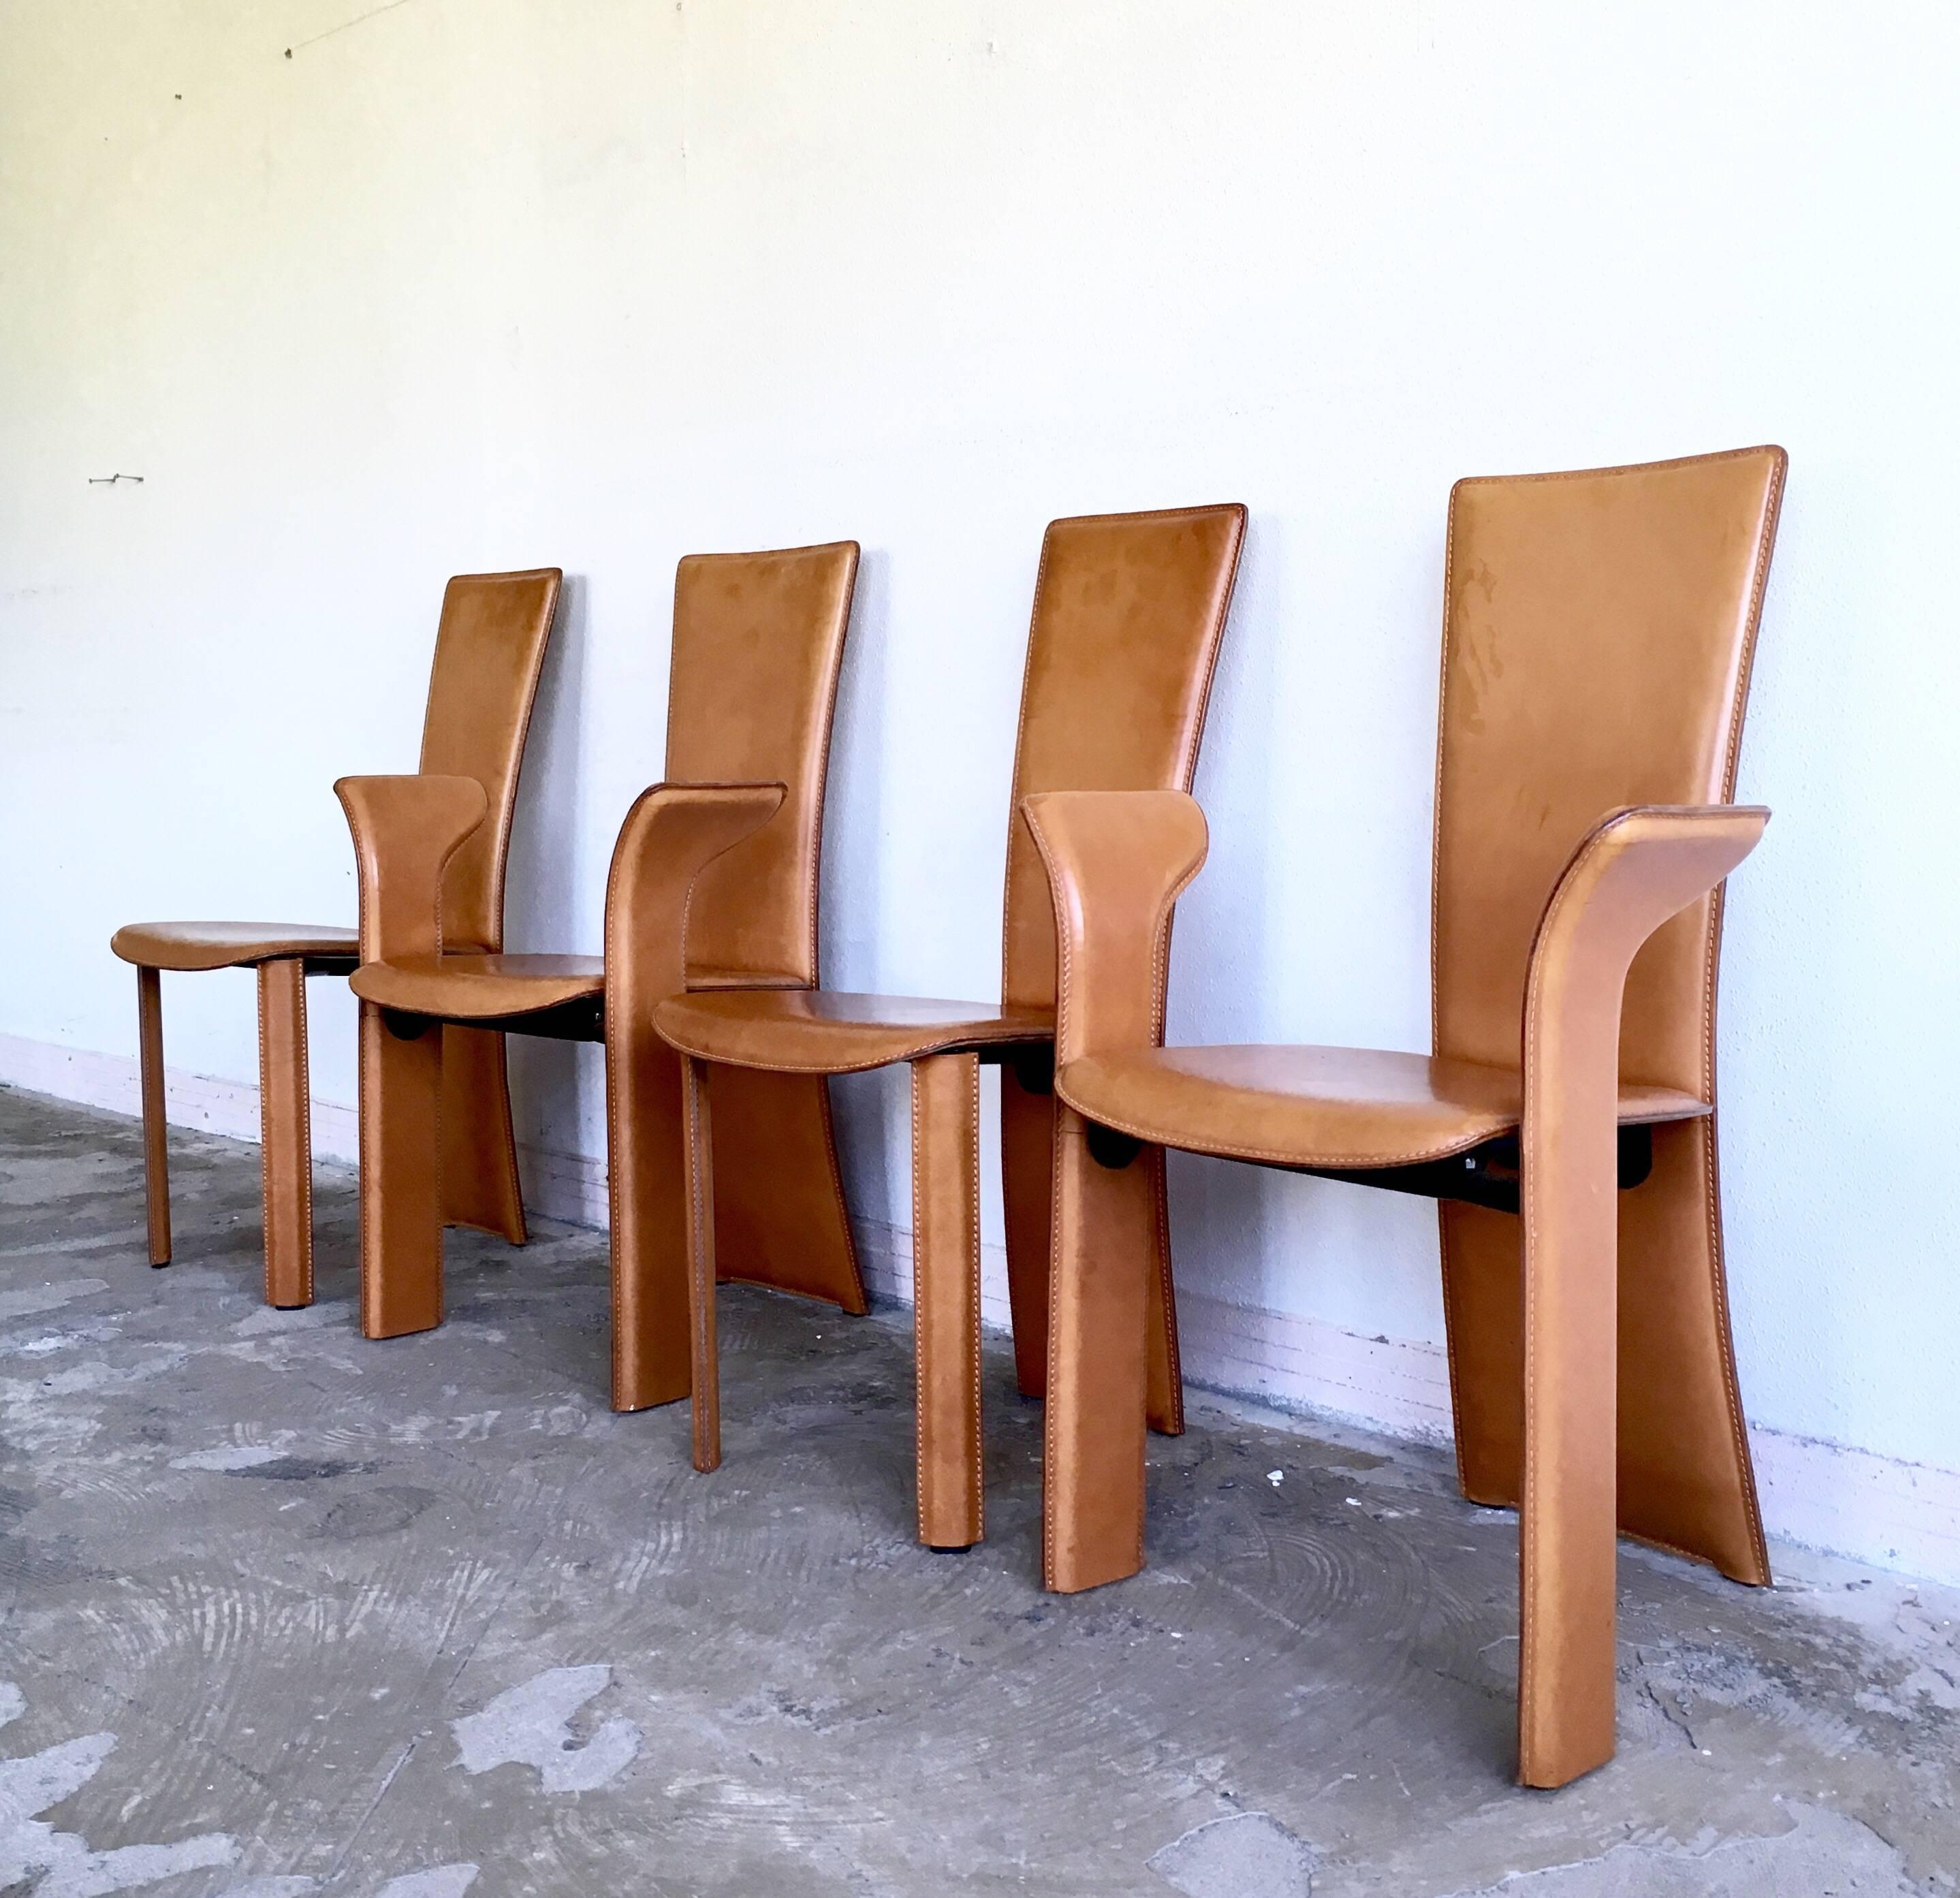 Modern Frag, Set of Four Cognac Colored Leather Dining Chairs, circa 1980s